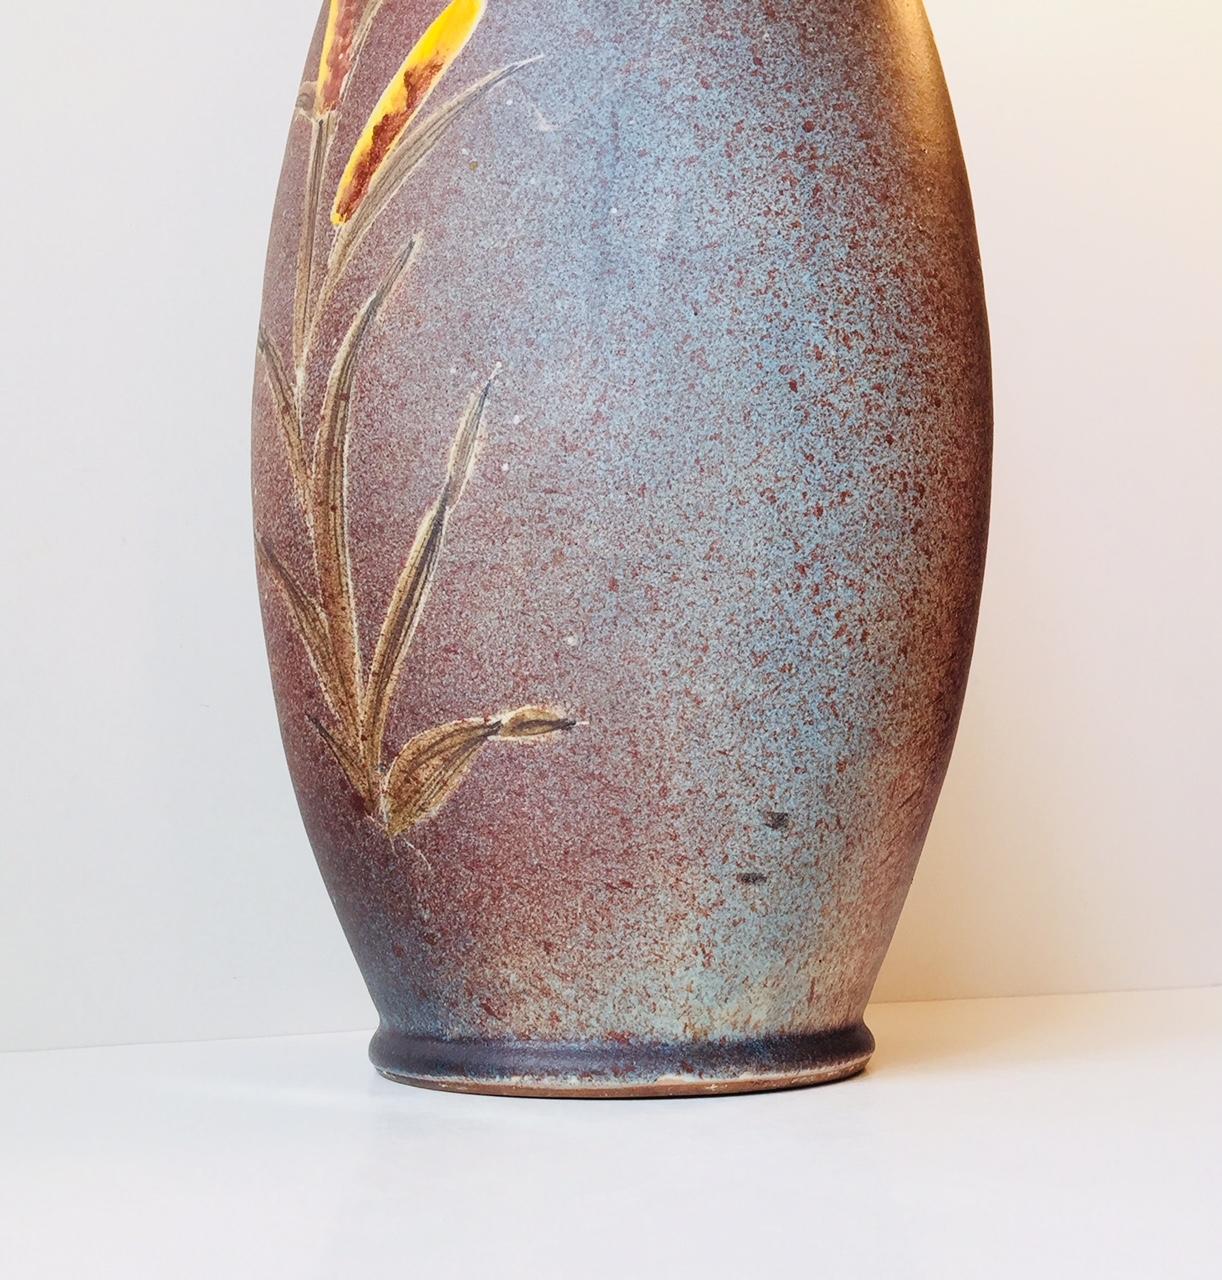 Delicately glazed floor vase in dusty blue, pink and purple glazed and hand-applied glazes depicting ducks to one side and Bulrush' to the other. It is signed Tilgmans, Sweden. The glaze decoration is by C (unidentified). Initial to the front. Fine